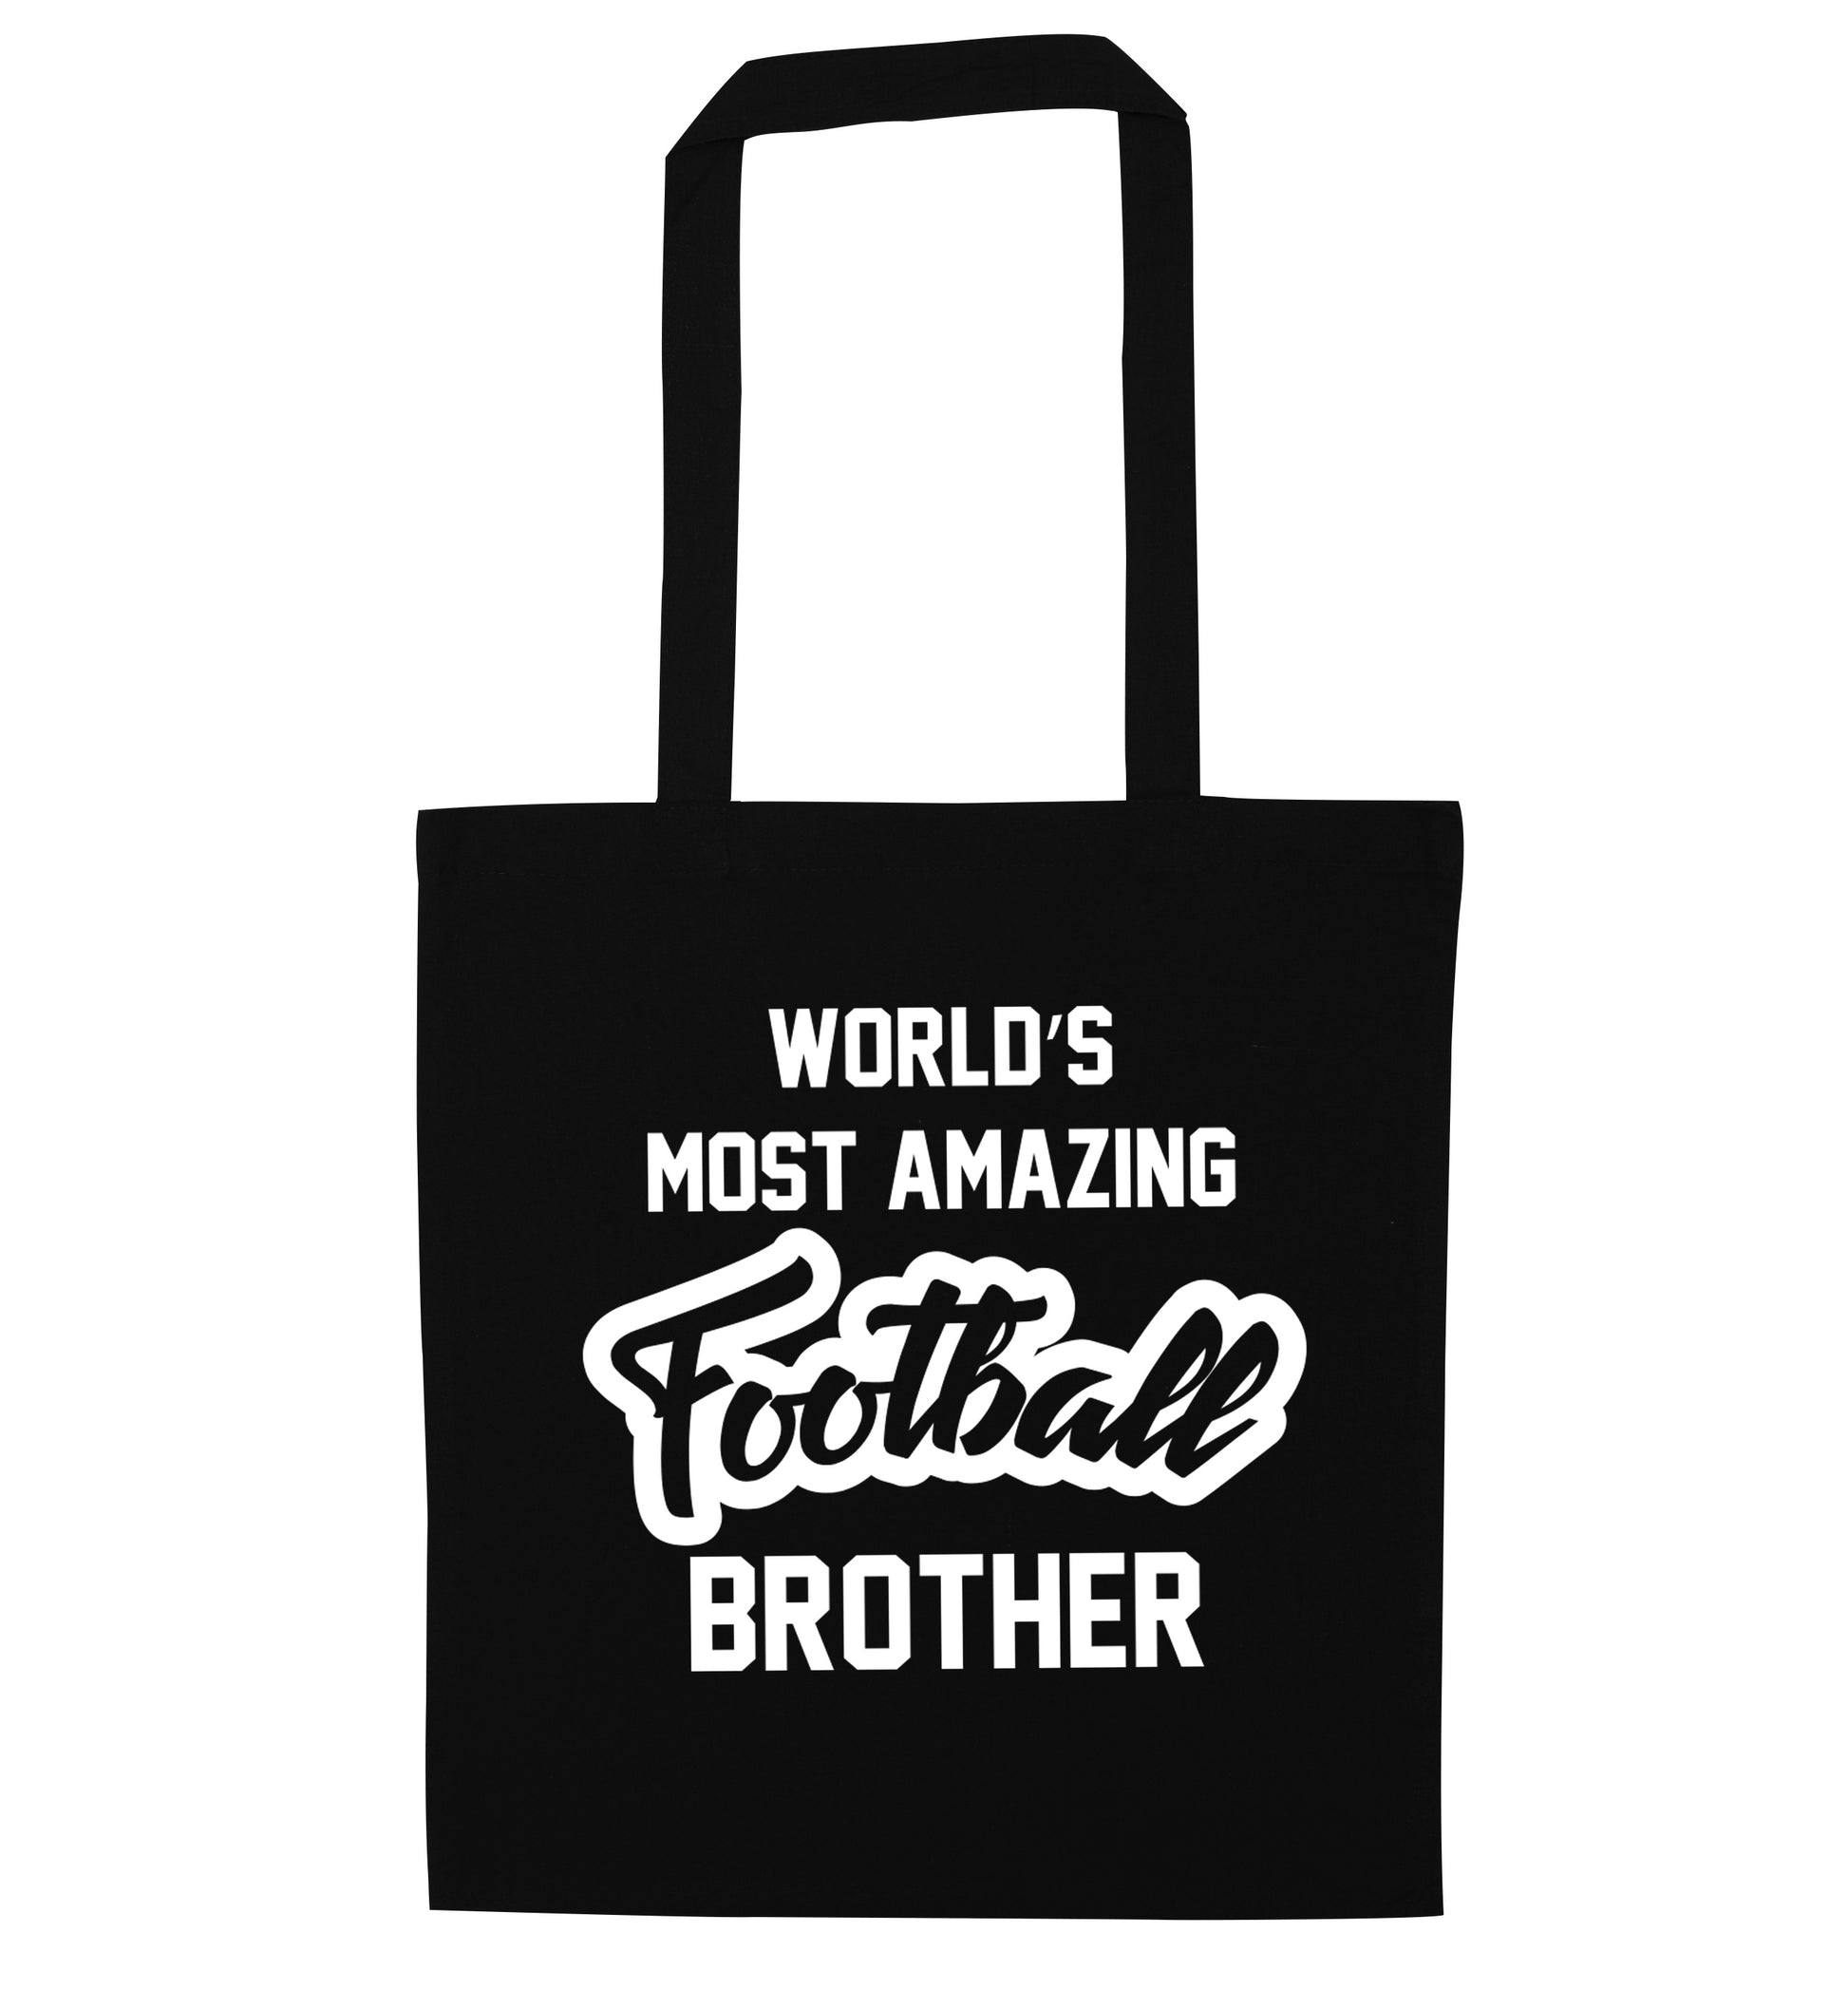 Worlds most amazing football brother black tote bag